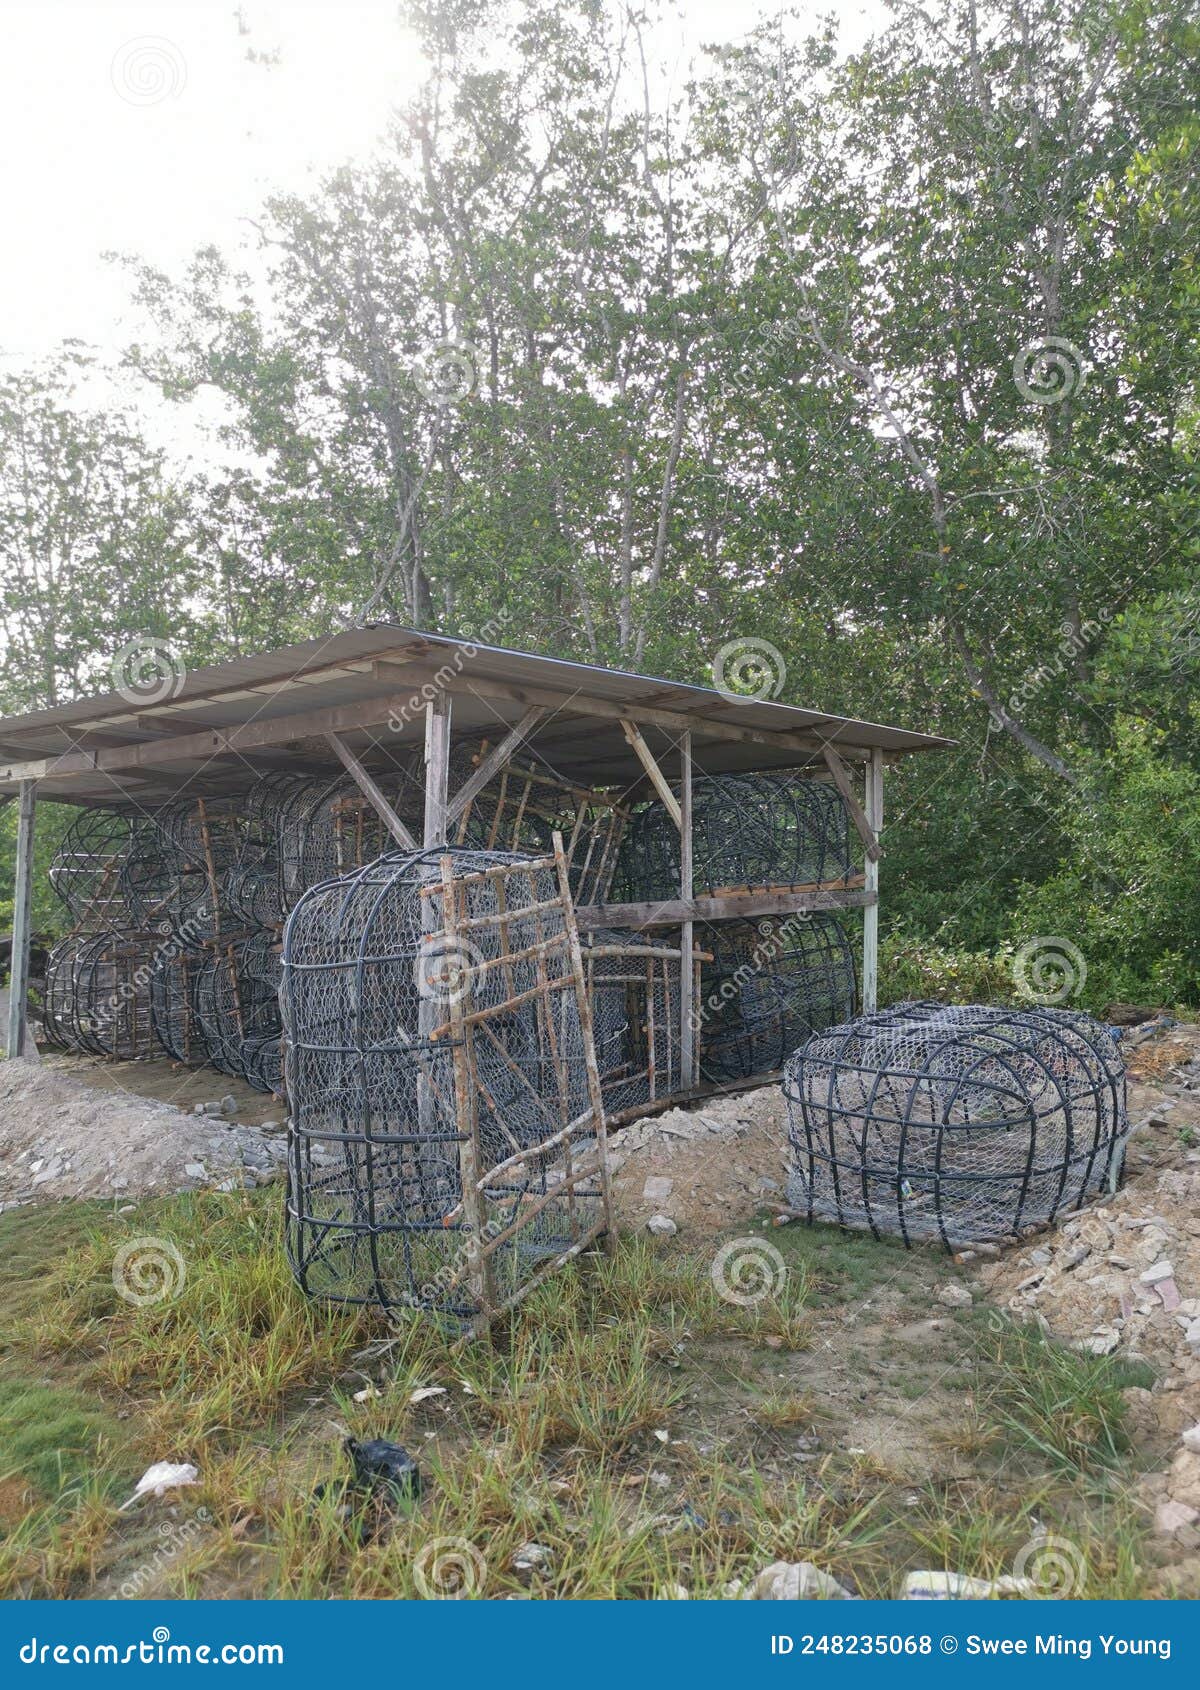 Outdoor Scene of the DIY Fish Trap Structure Make from Mangrove Wood,wire  and Polystyrene Pipe. Stock Photo - Image of mangrove, gear: 248235068